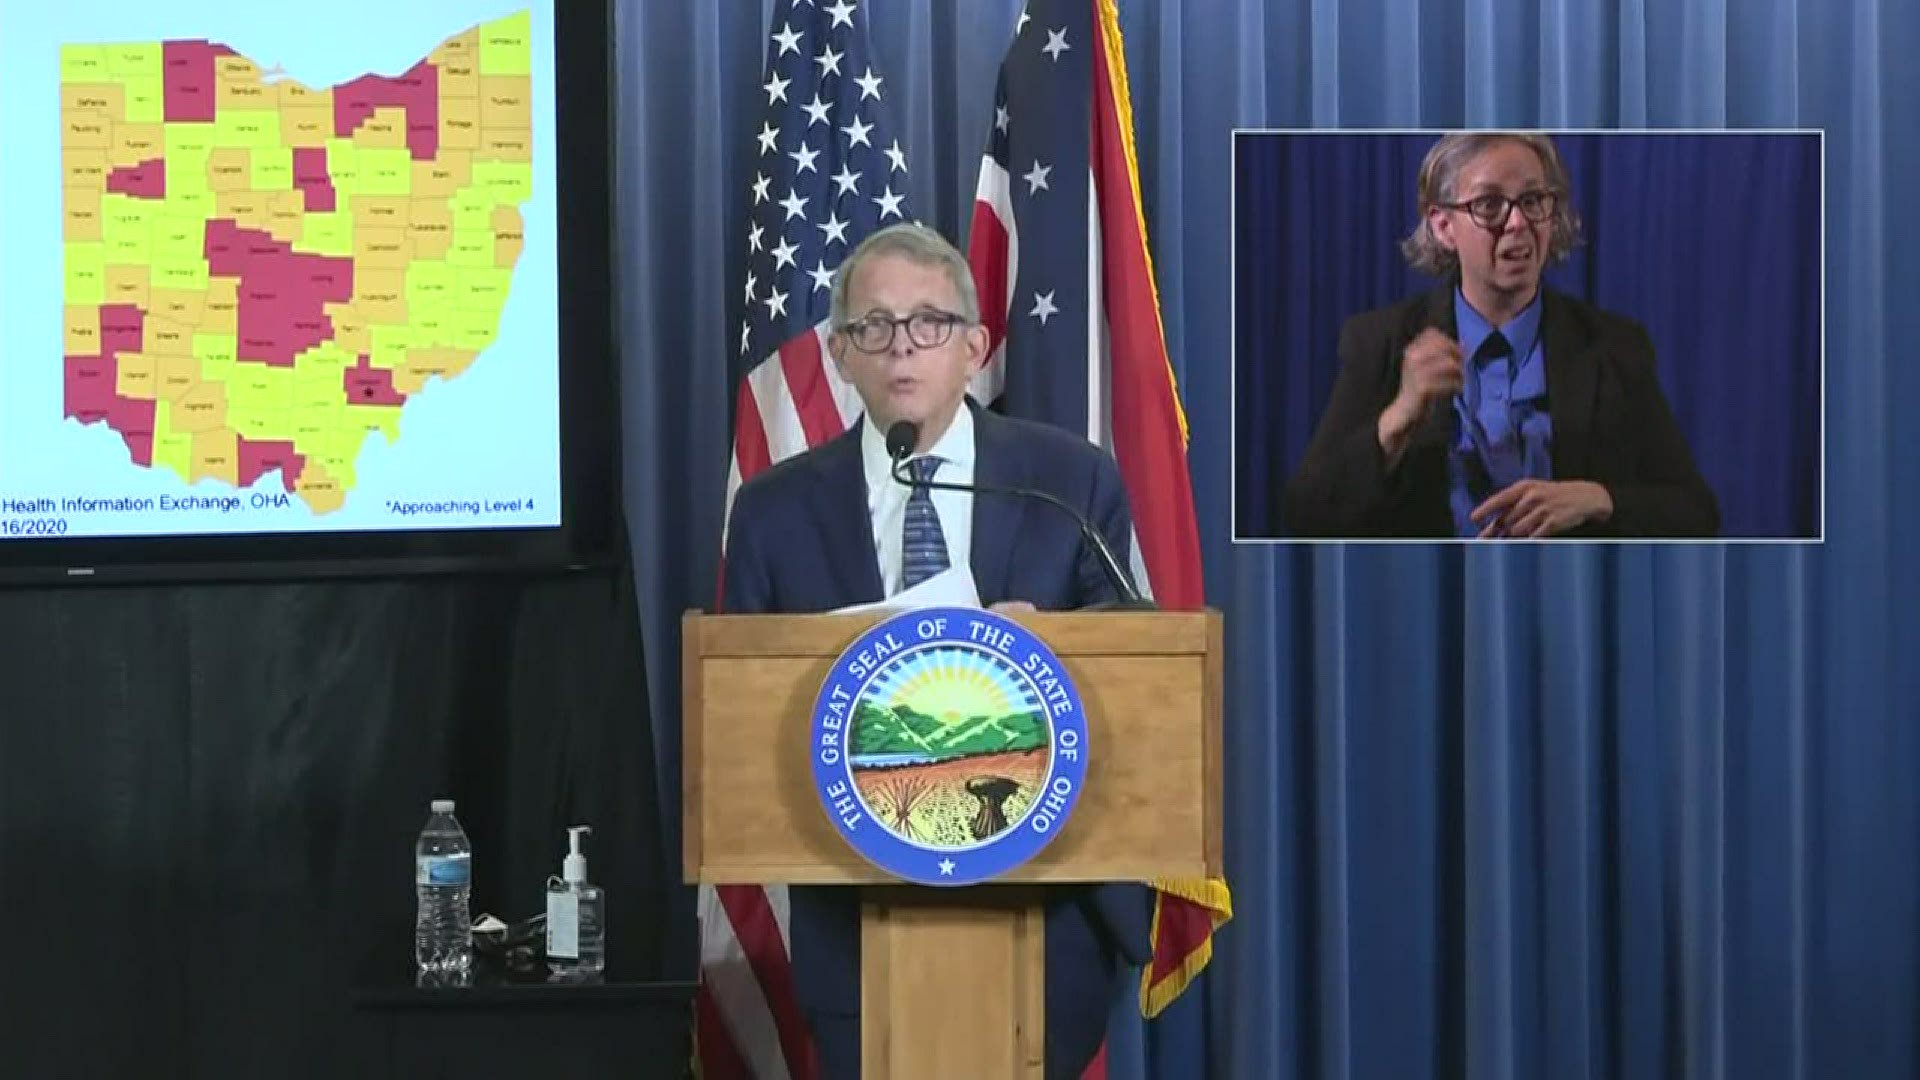 Putting Lucas County at Red Level 3, DeWine said Lucas County's coronavirus numbers have reached a level of concern.